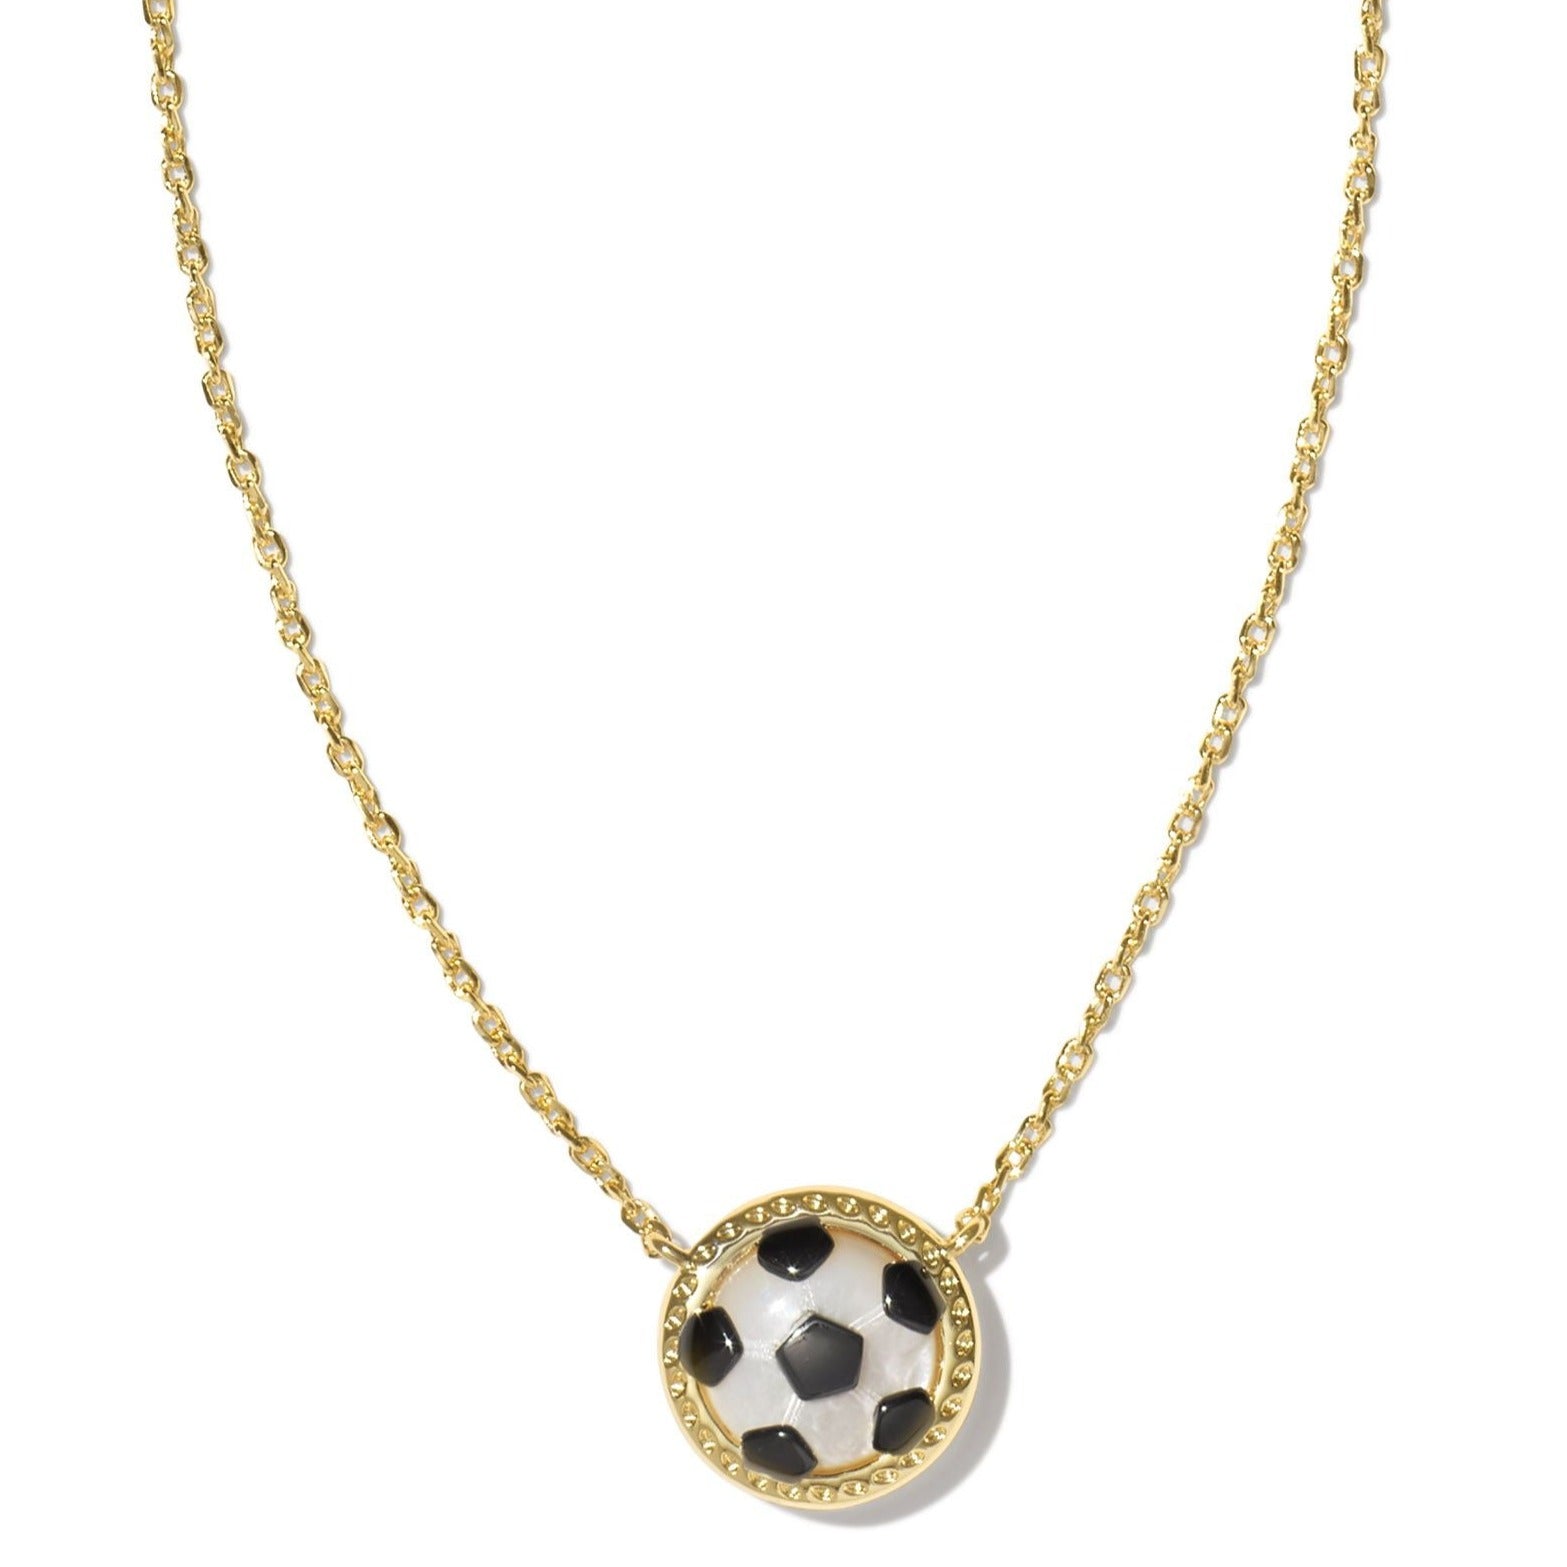 Kendra Scott | Soccer Gold Short Pendant Necklace in Ivory Mother-of-Pearl - Giddy Up Glamour Boutique